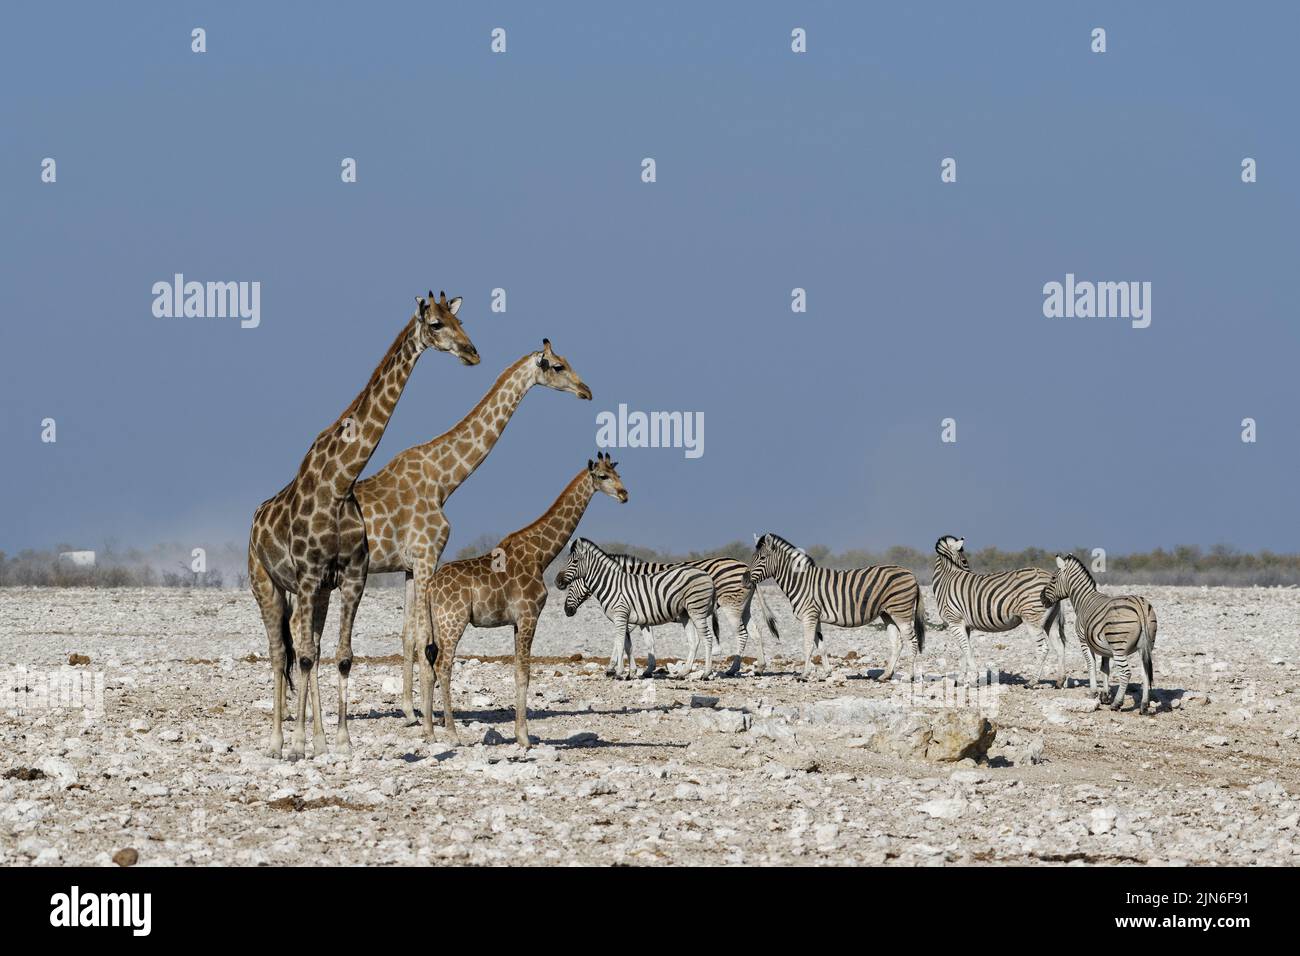 Angolan giraffes (Giraffa camelopardalis angolensis), adult female (left) with young female and foal, herd of Burchell's zebras at waterhole,Etosha NP Stock Photo